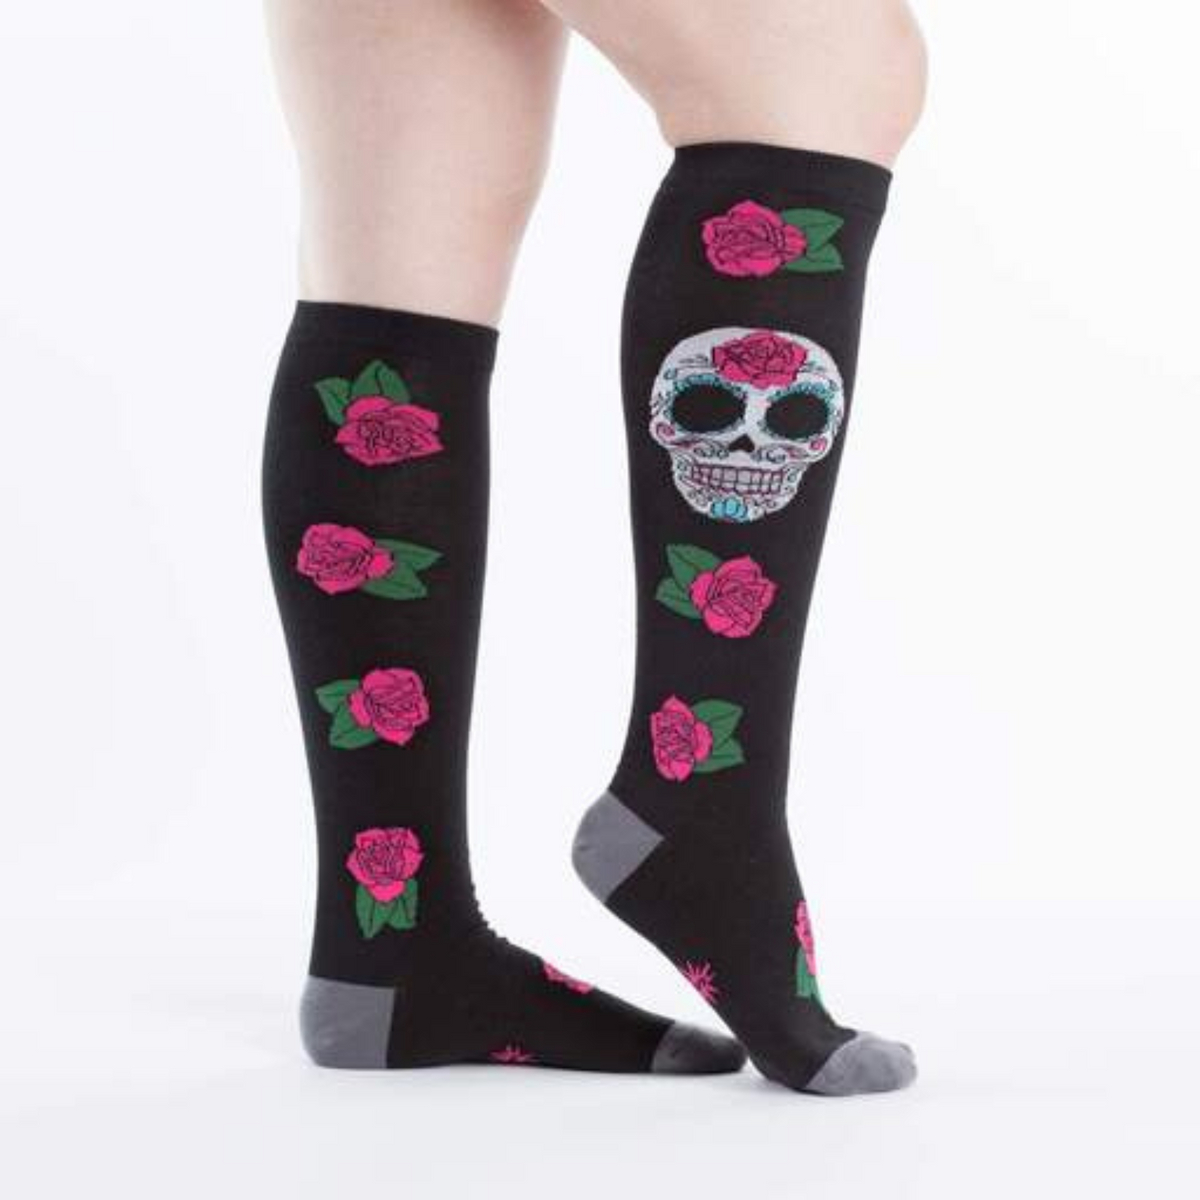 Sock It To Me Sugar Skull women&#39;s knee high sock featuring black sock with red roses all over and large Day of the Dead Sugar Skull. Socks worn by model seen from side. 